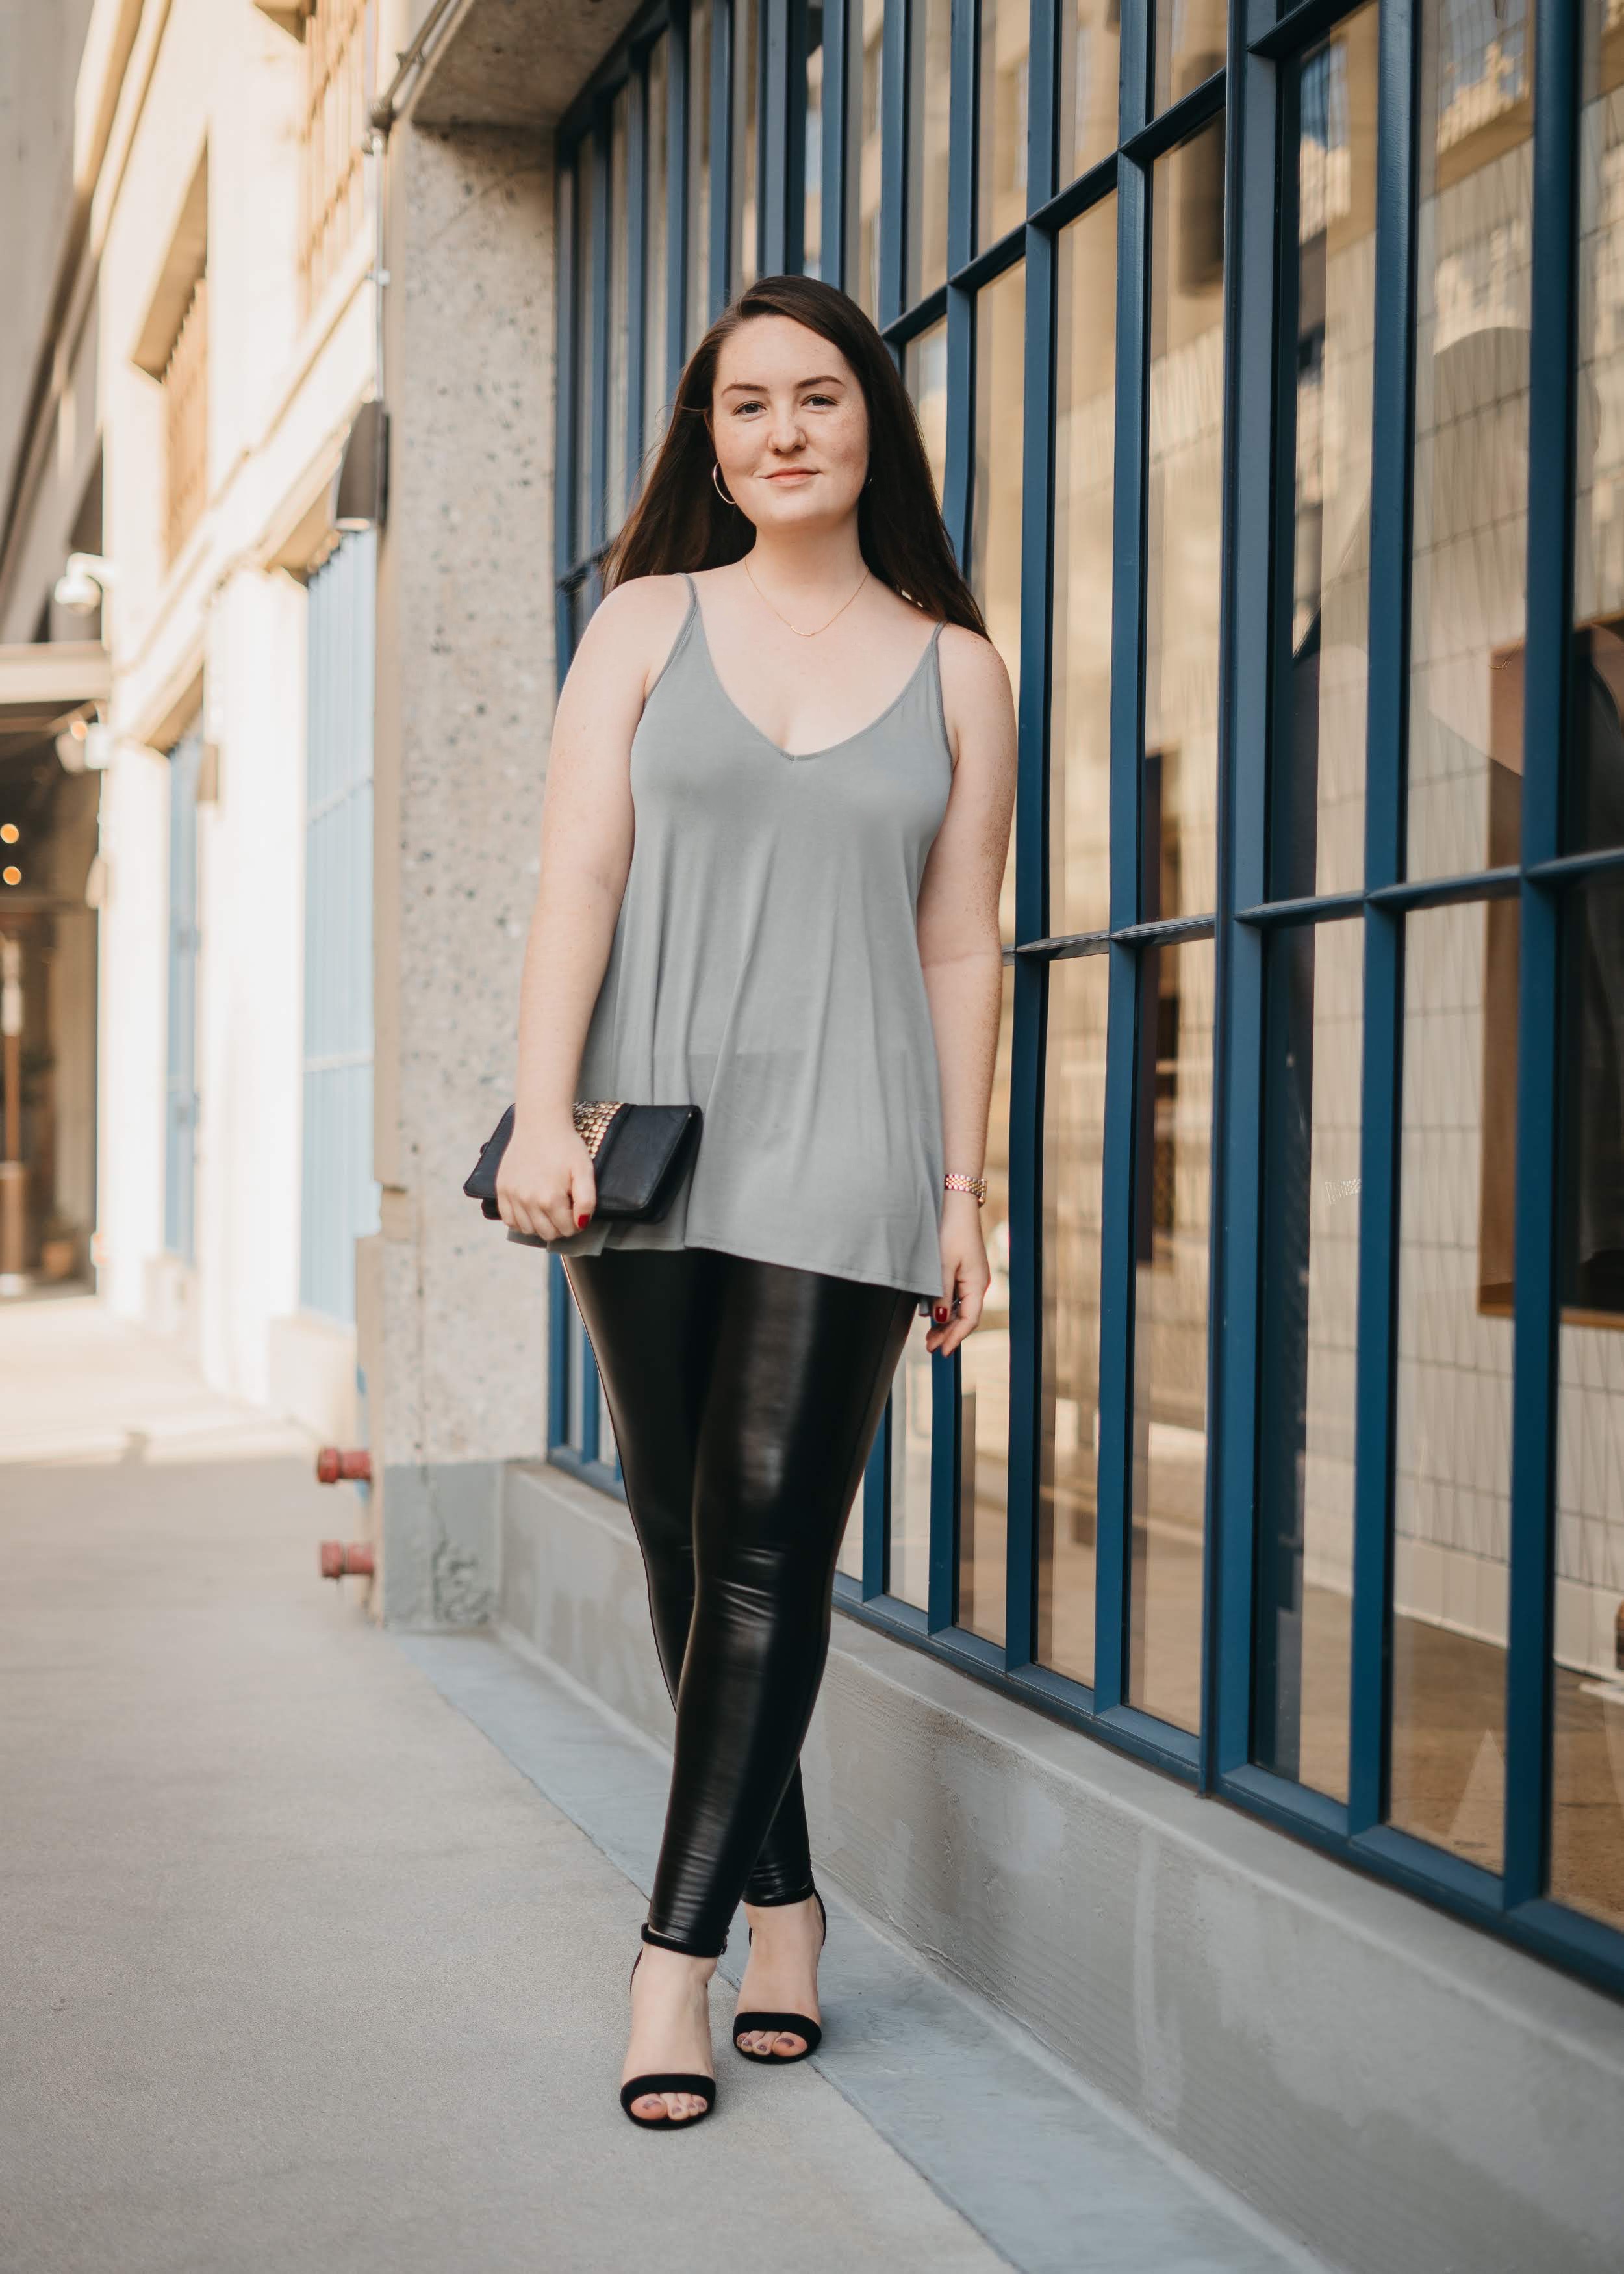 20 Ways To Wear Leather Leggings With Your Outfit - Society19 | Party outfits  night, Outfits with leggings, New years eve outfits